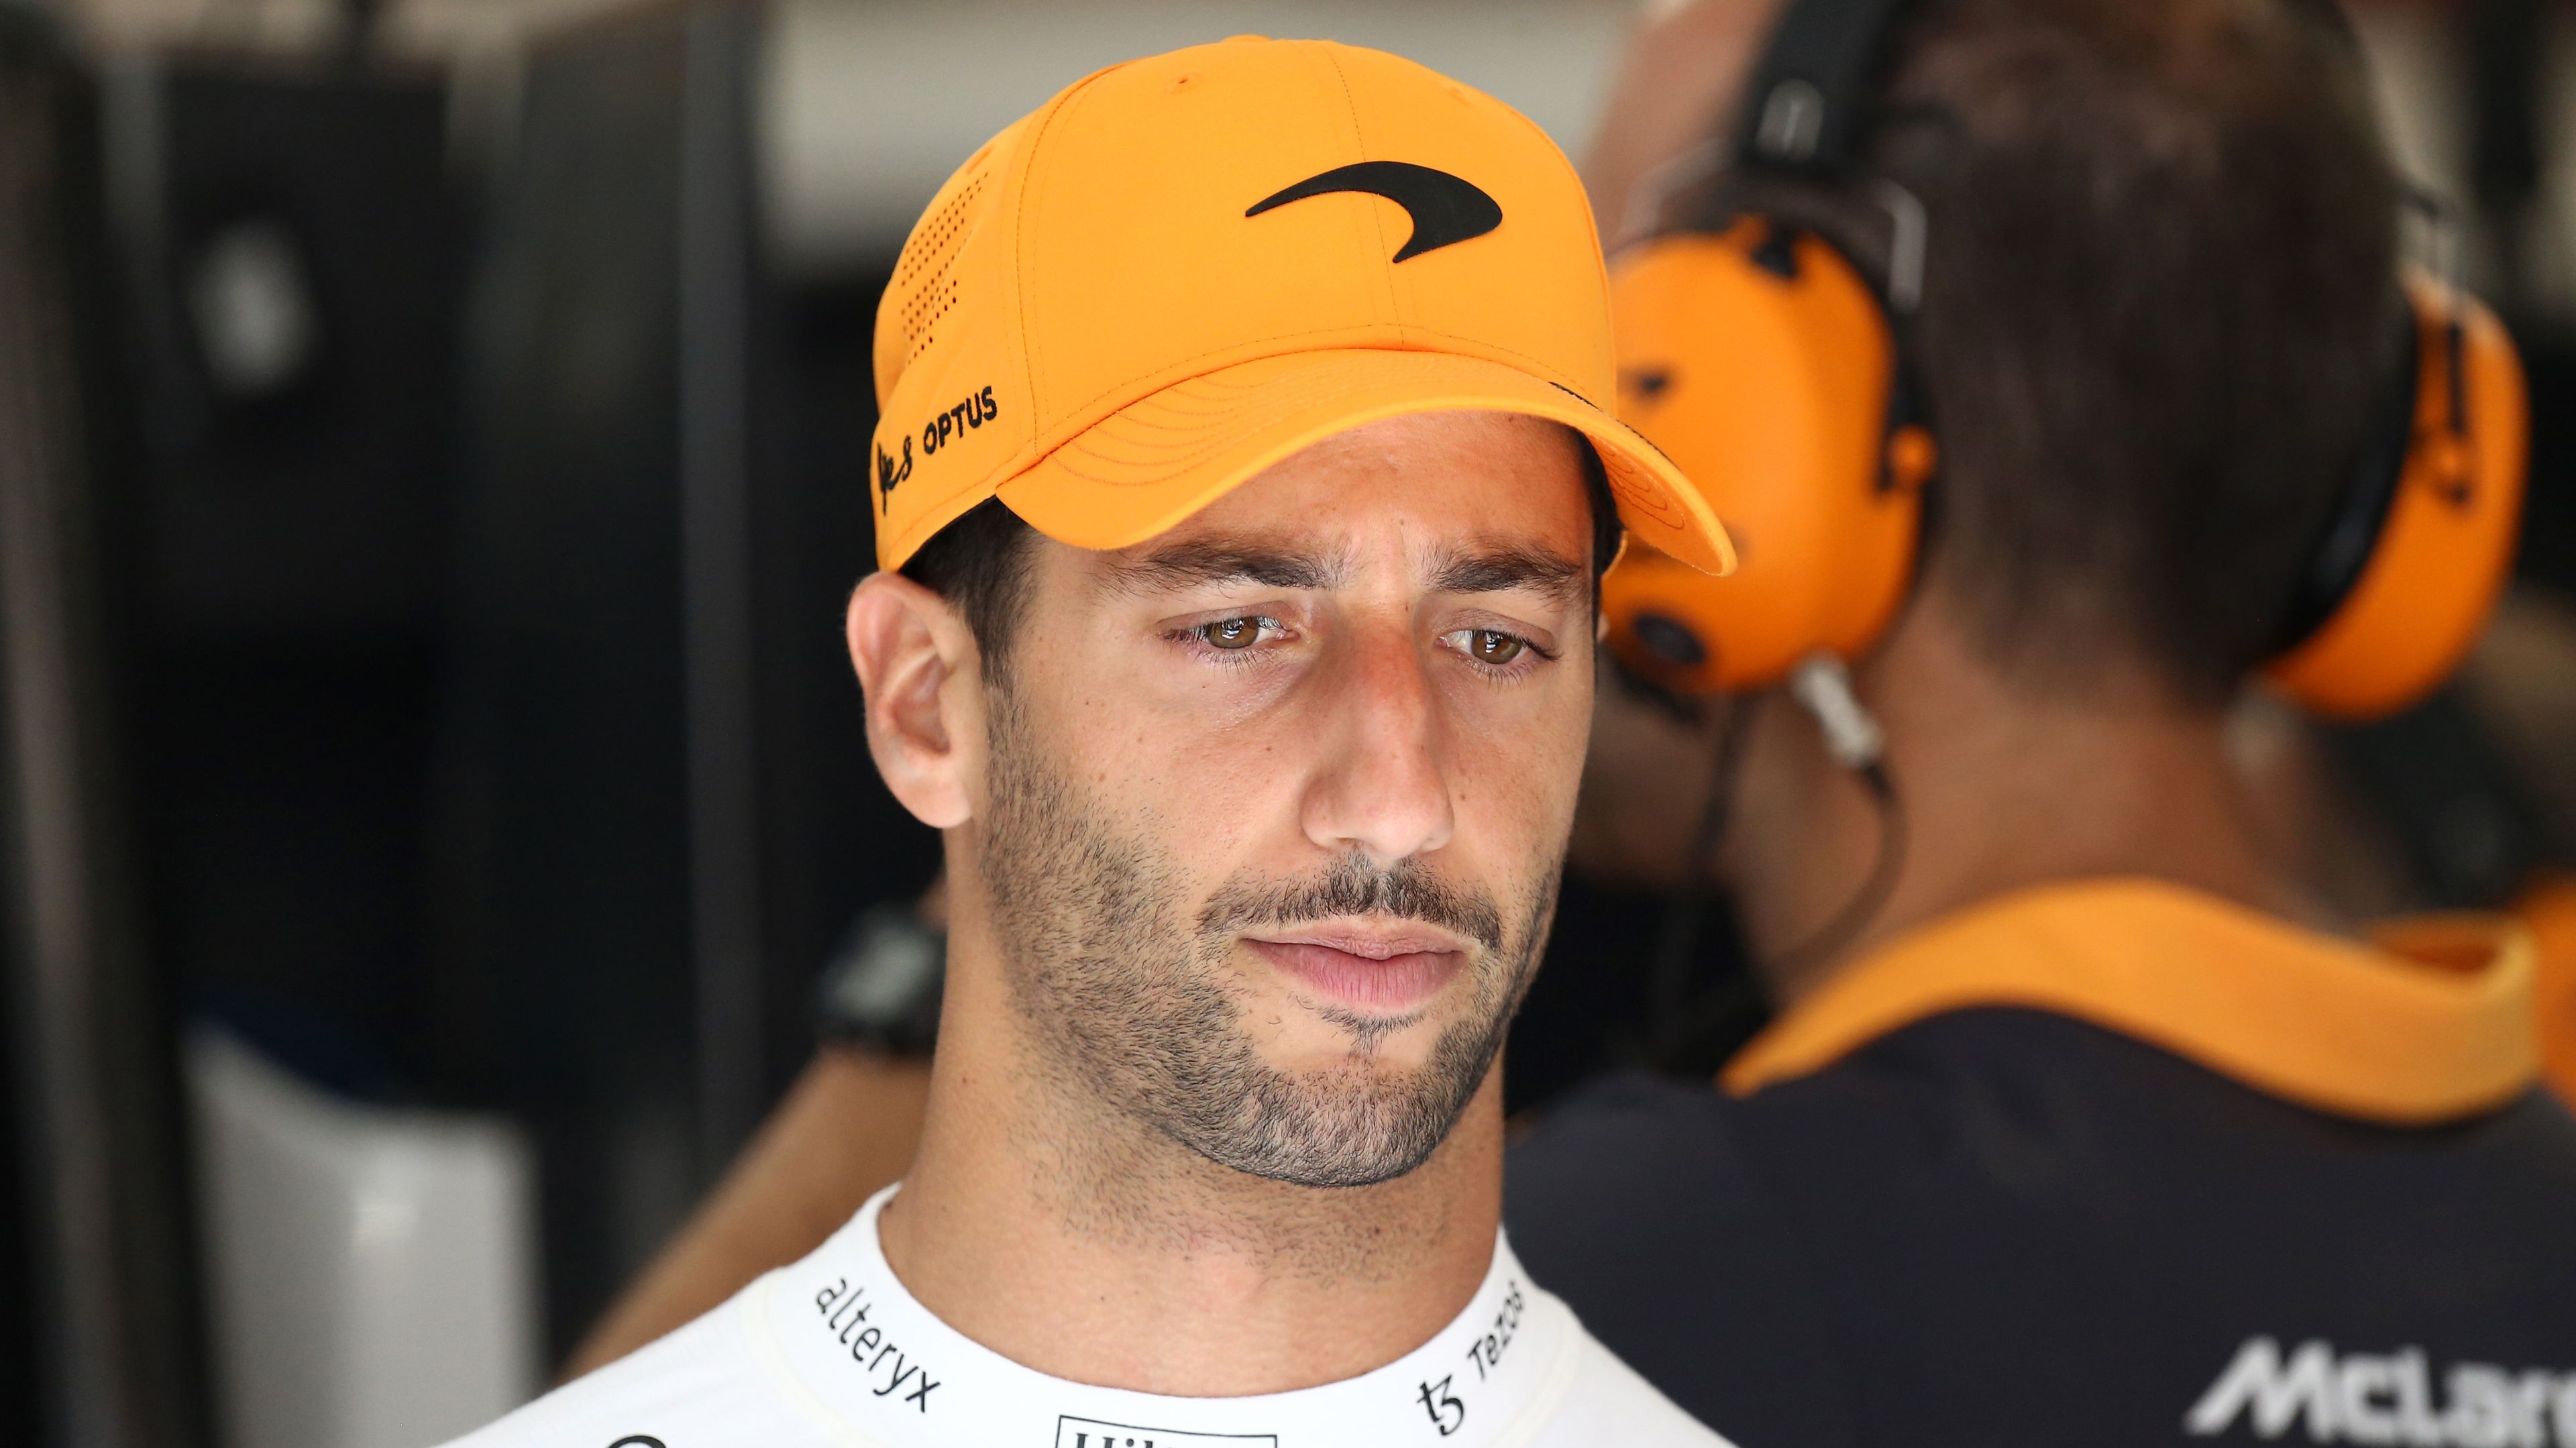 CROPPED. Daniel Ricciardo of McLaren  looks on during free practice 2 ahead of the F1 Grand Prix of Hungary. (Photo by Marco Canoniero/LightRocket via Getty Images)